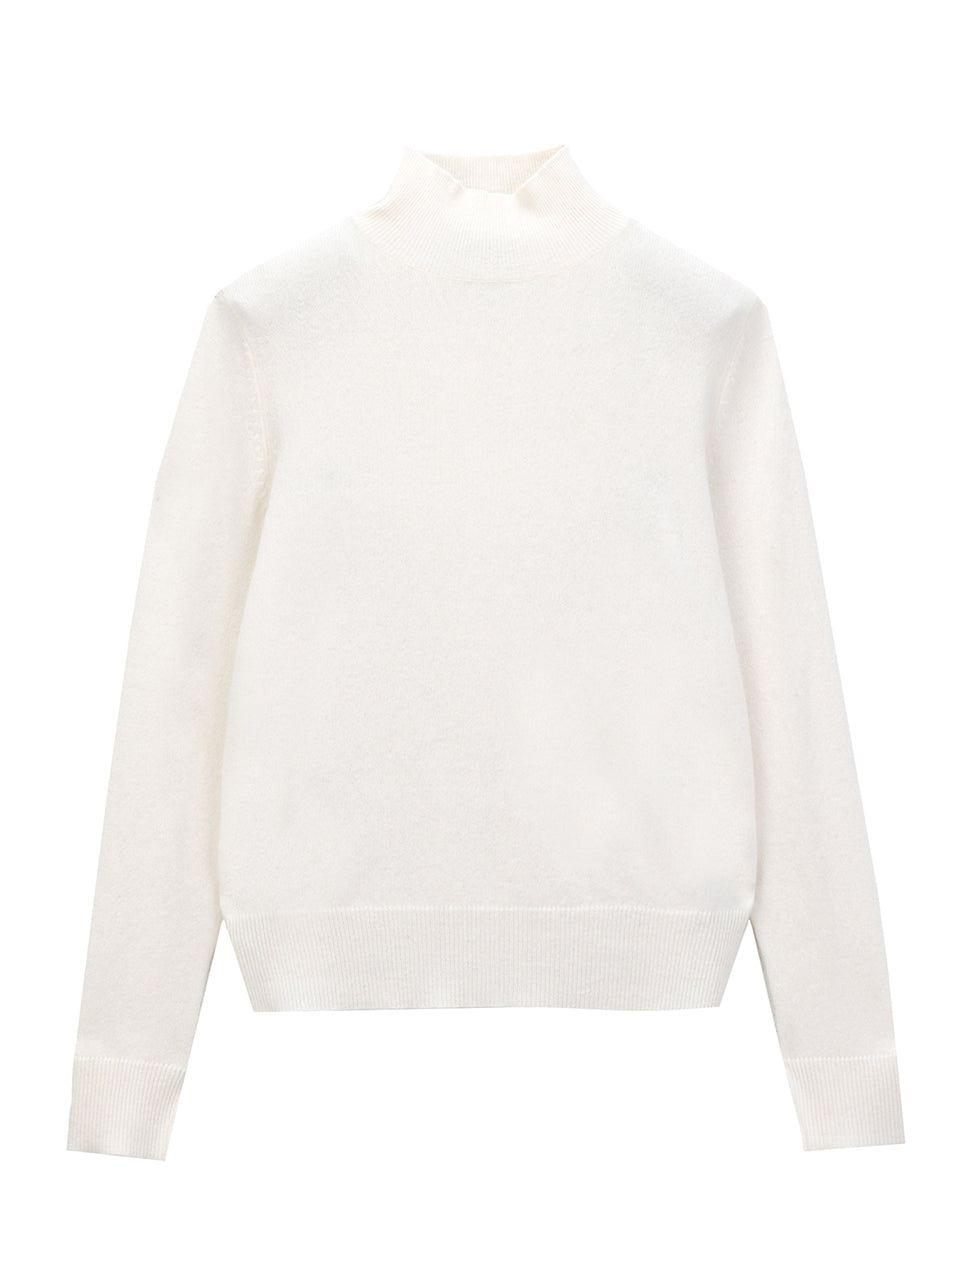 Simple High Neck Sweater_Vintage White